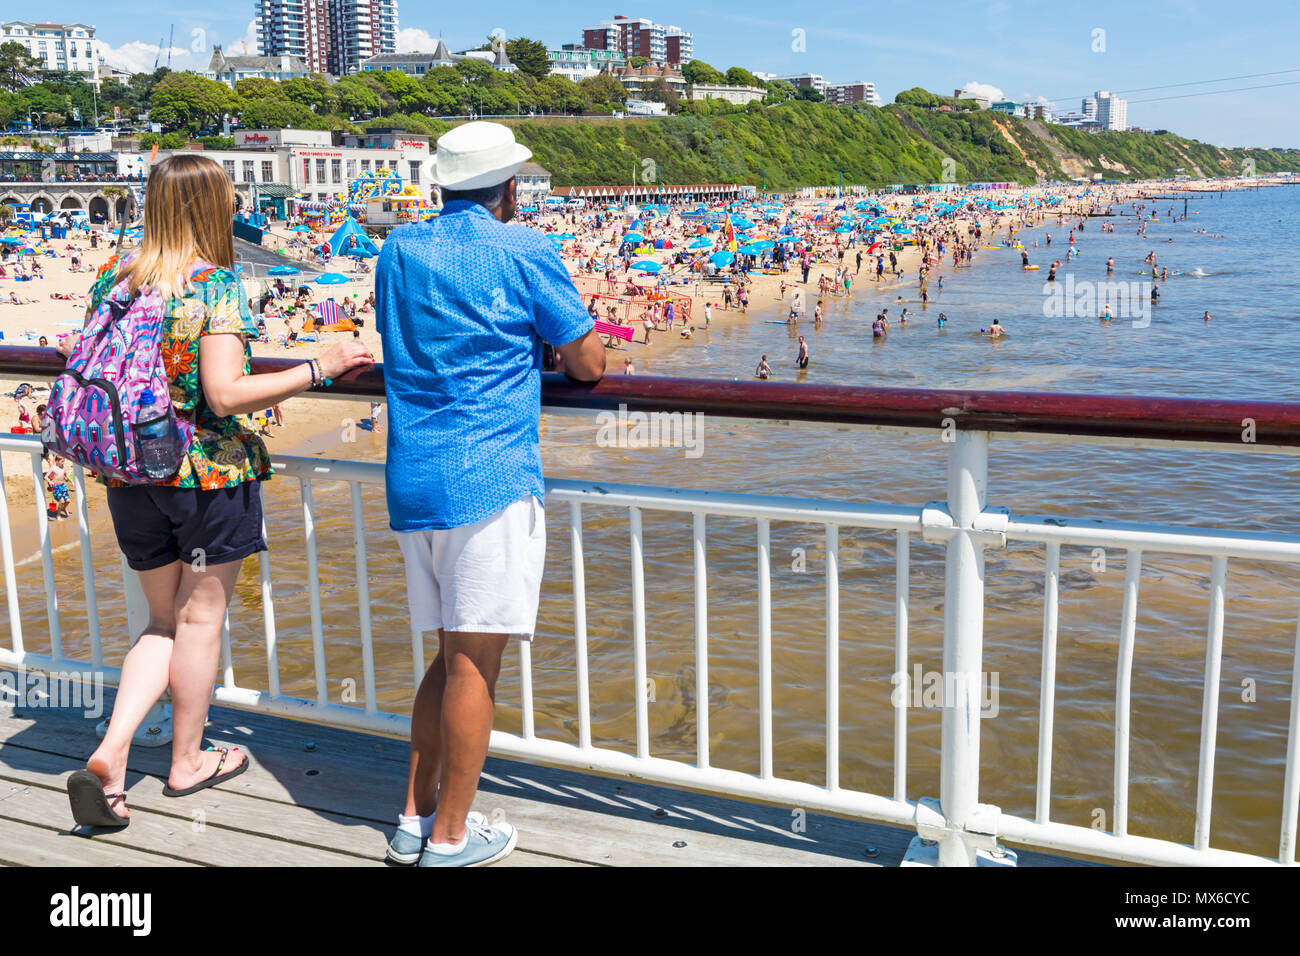 Bournemouth, Dorset, UK. 3rd June 2018. UK weather: beaches are busy on a lovely warm sunny day with unbroken sunshine, as visitors head to the seaside to make the most of the sun and sea and top up their tans. Couple standing on Bournemouth Pier looking at the crowded beach. Credit: Carolyn Jenkins/Alamy Live News Stock Photo